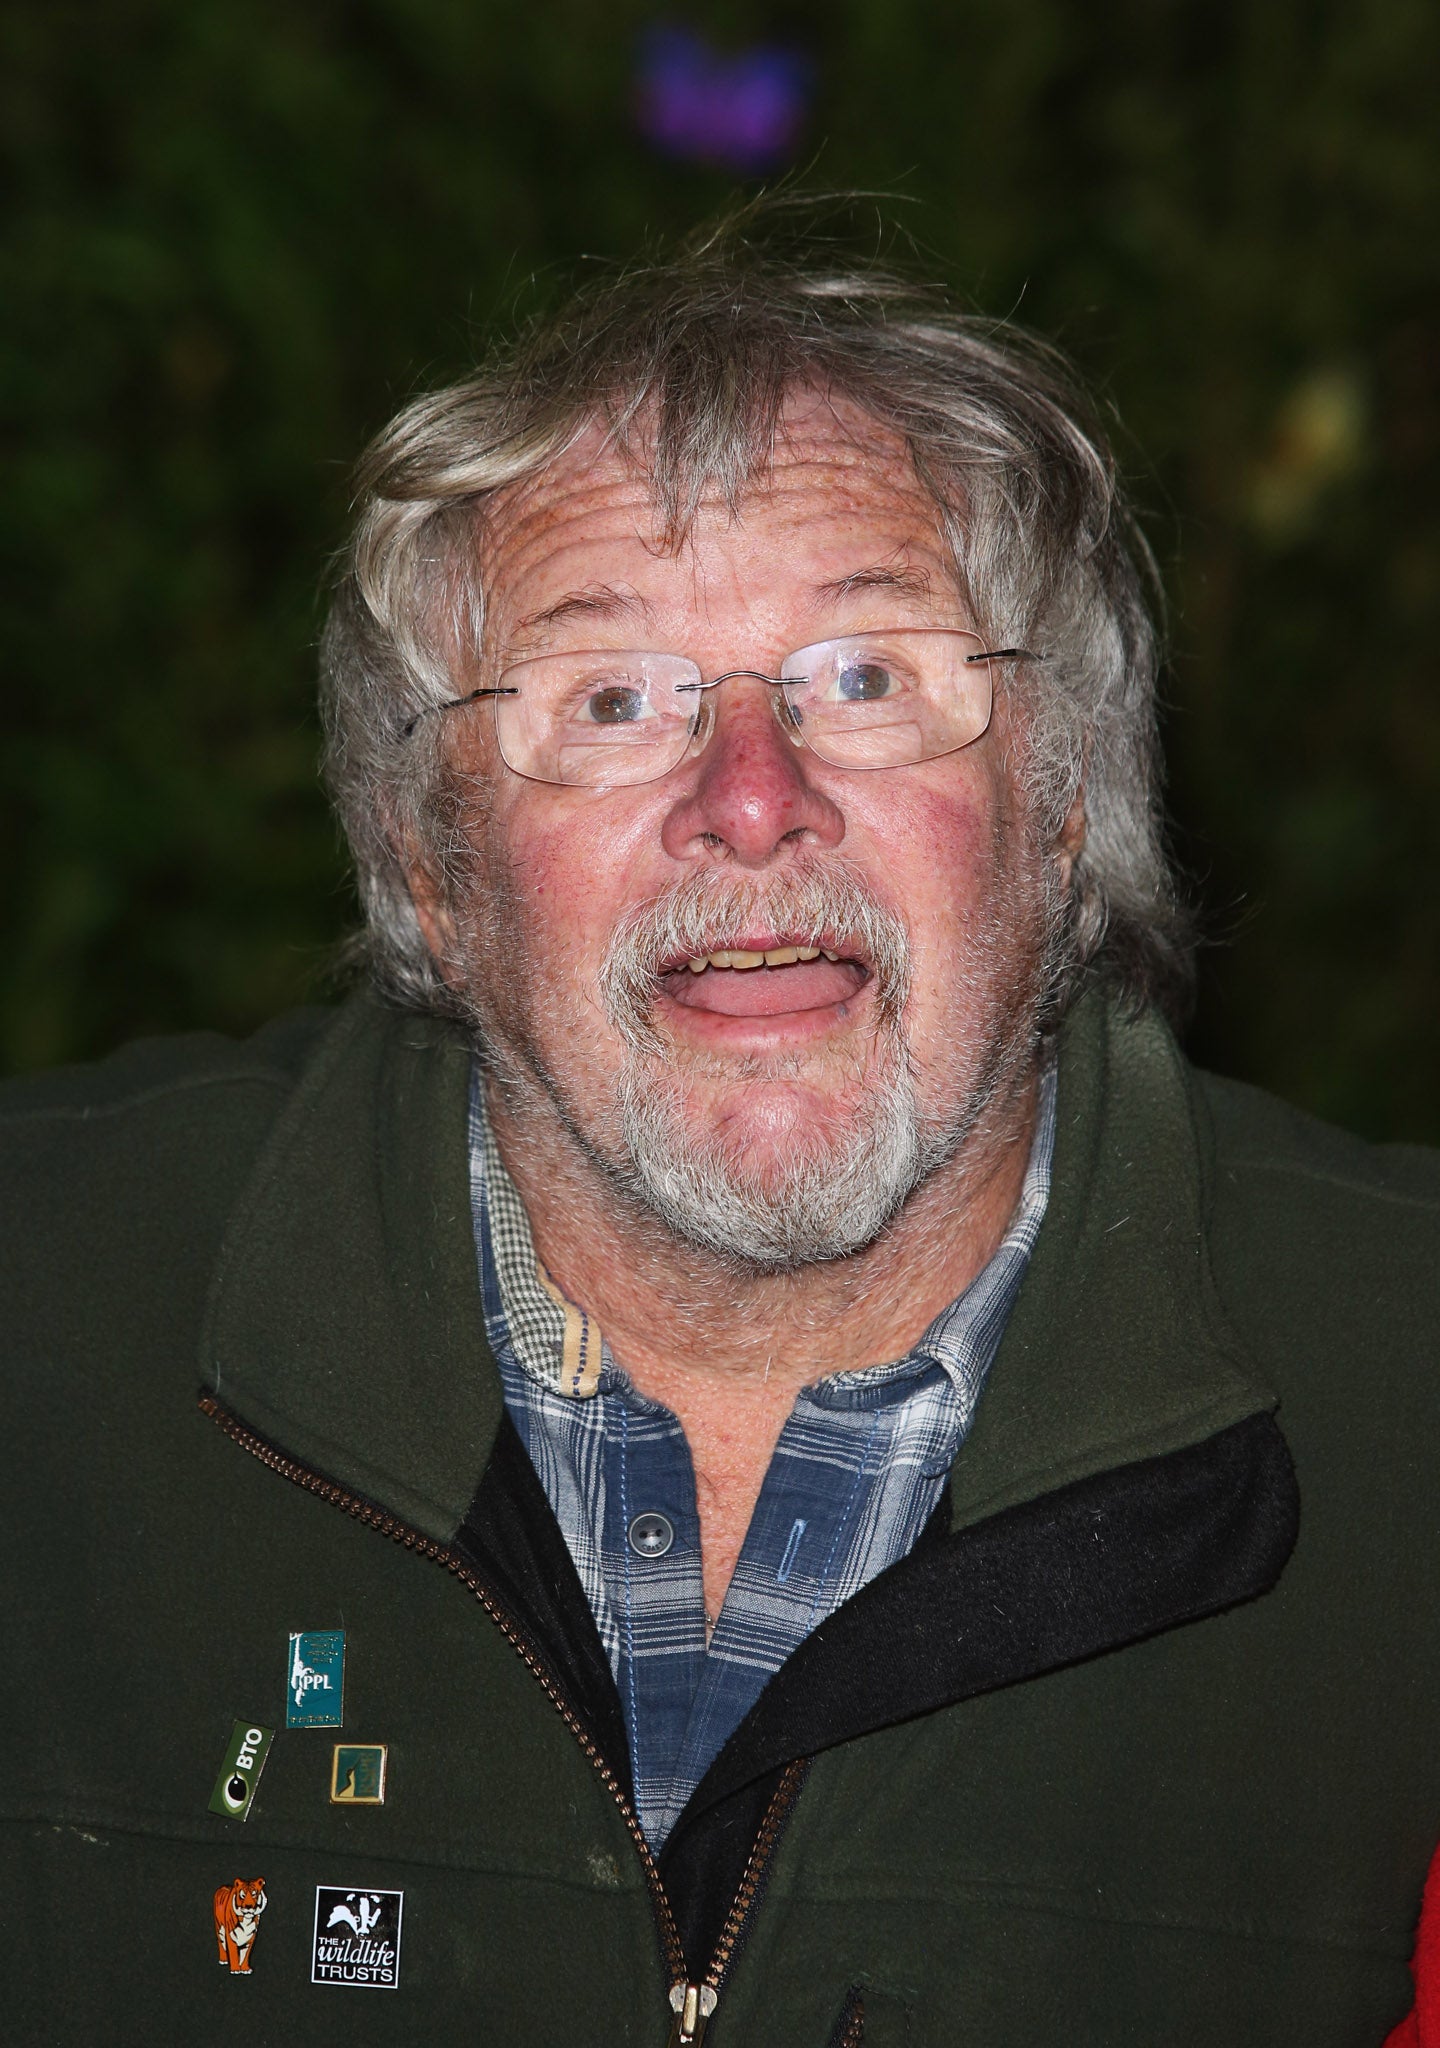 Bill Oddie is to question HSBC about connections to deforestation in Borneo